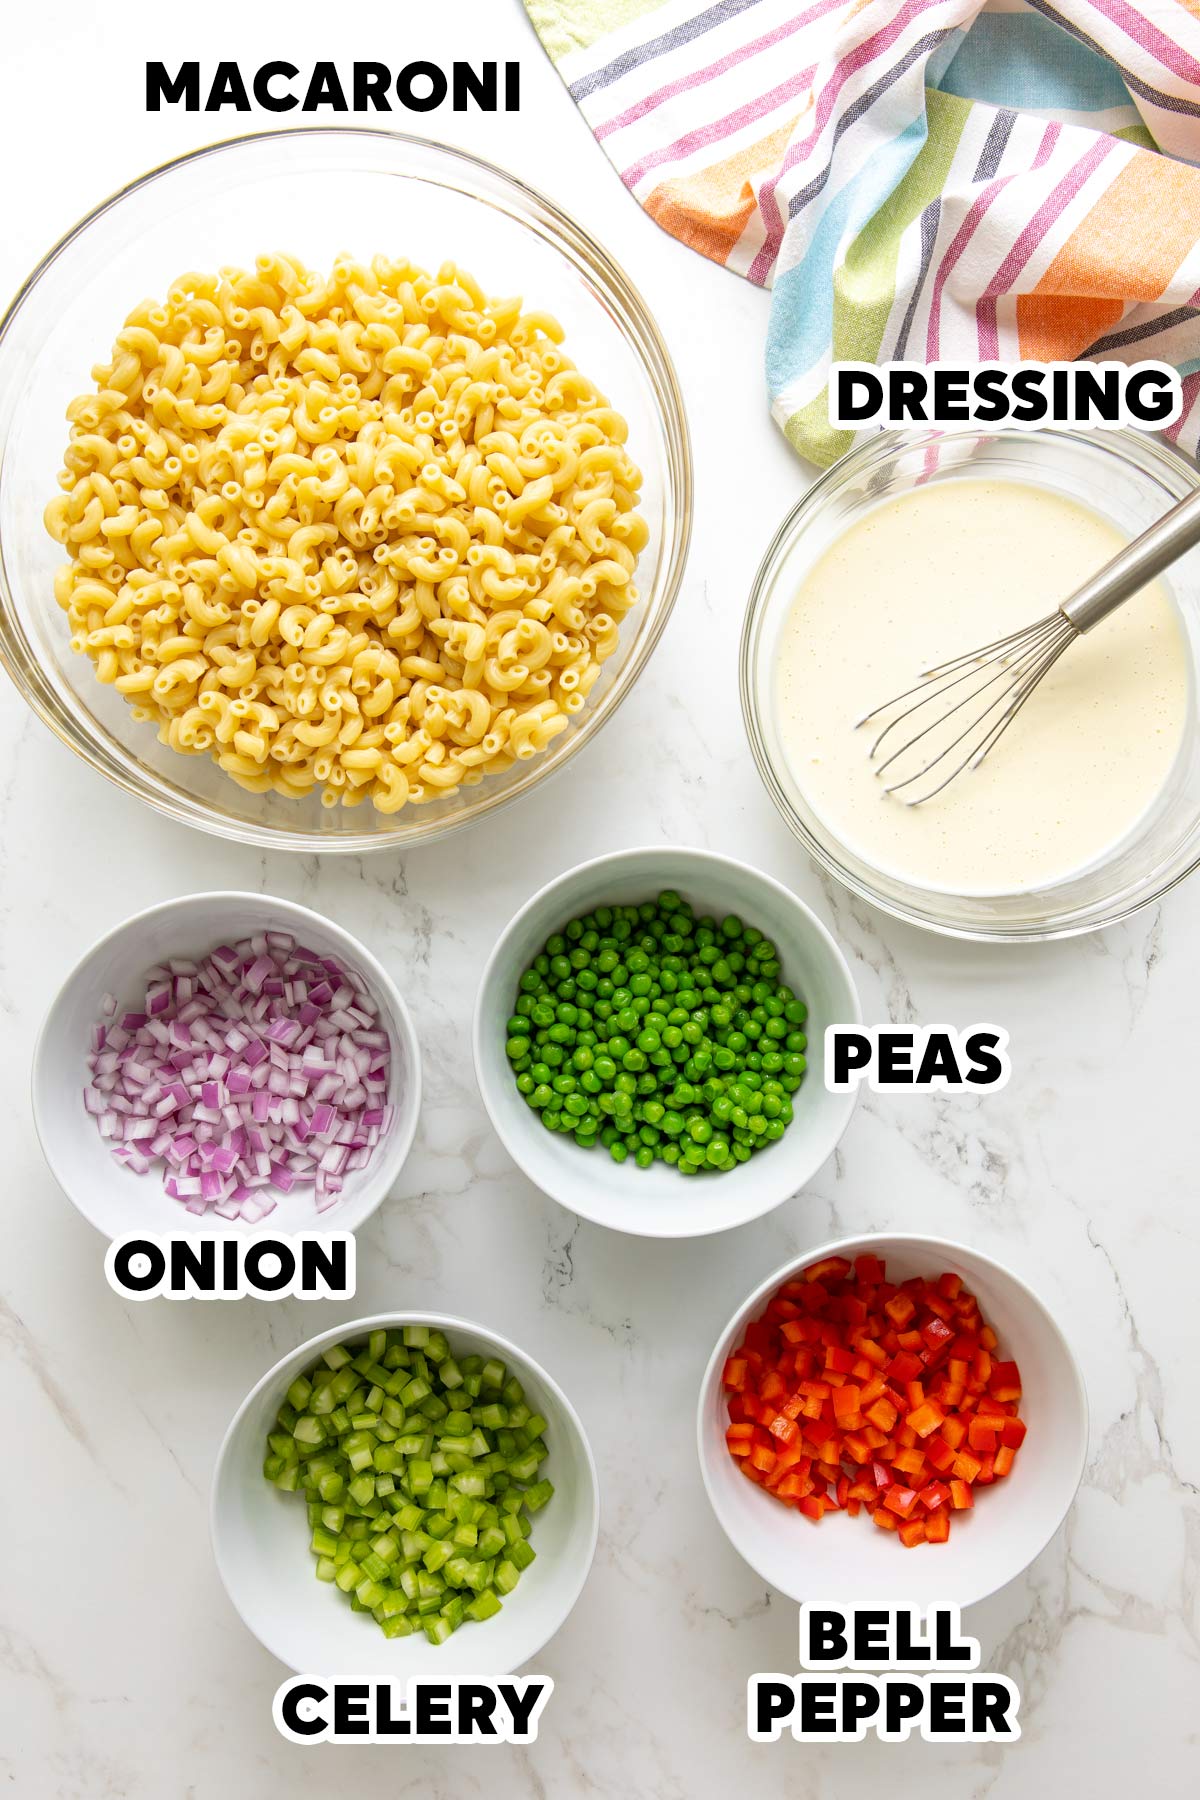 Overhead view of ingredients for macaroni salad with overlay text.